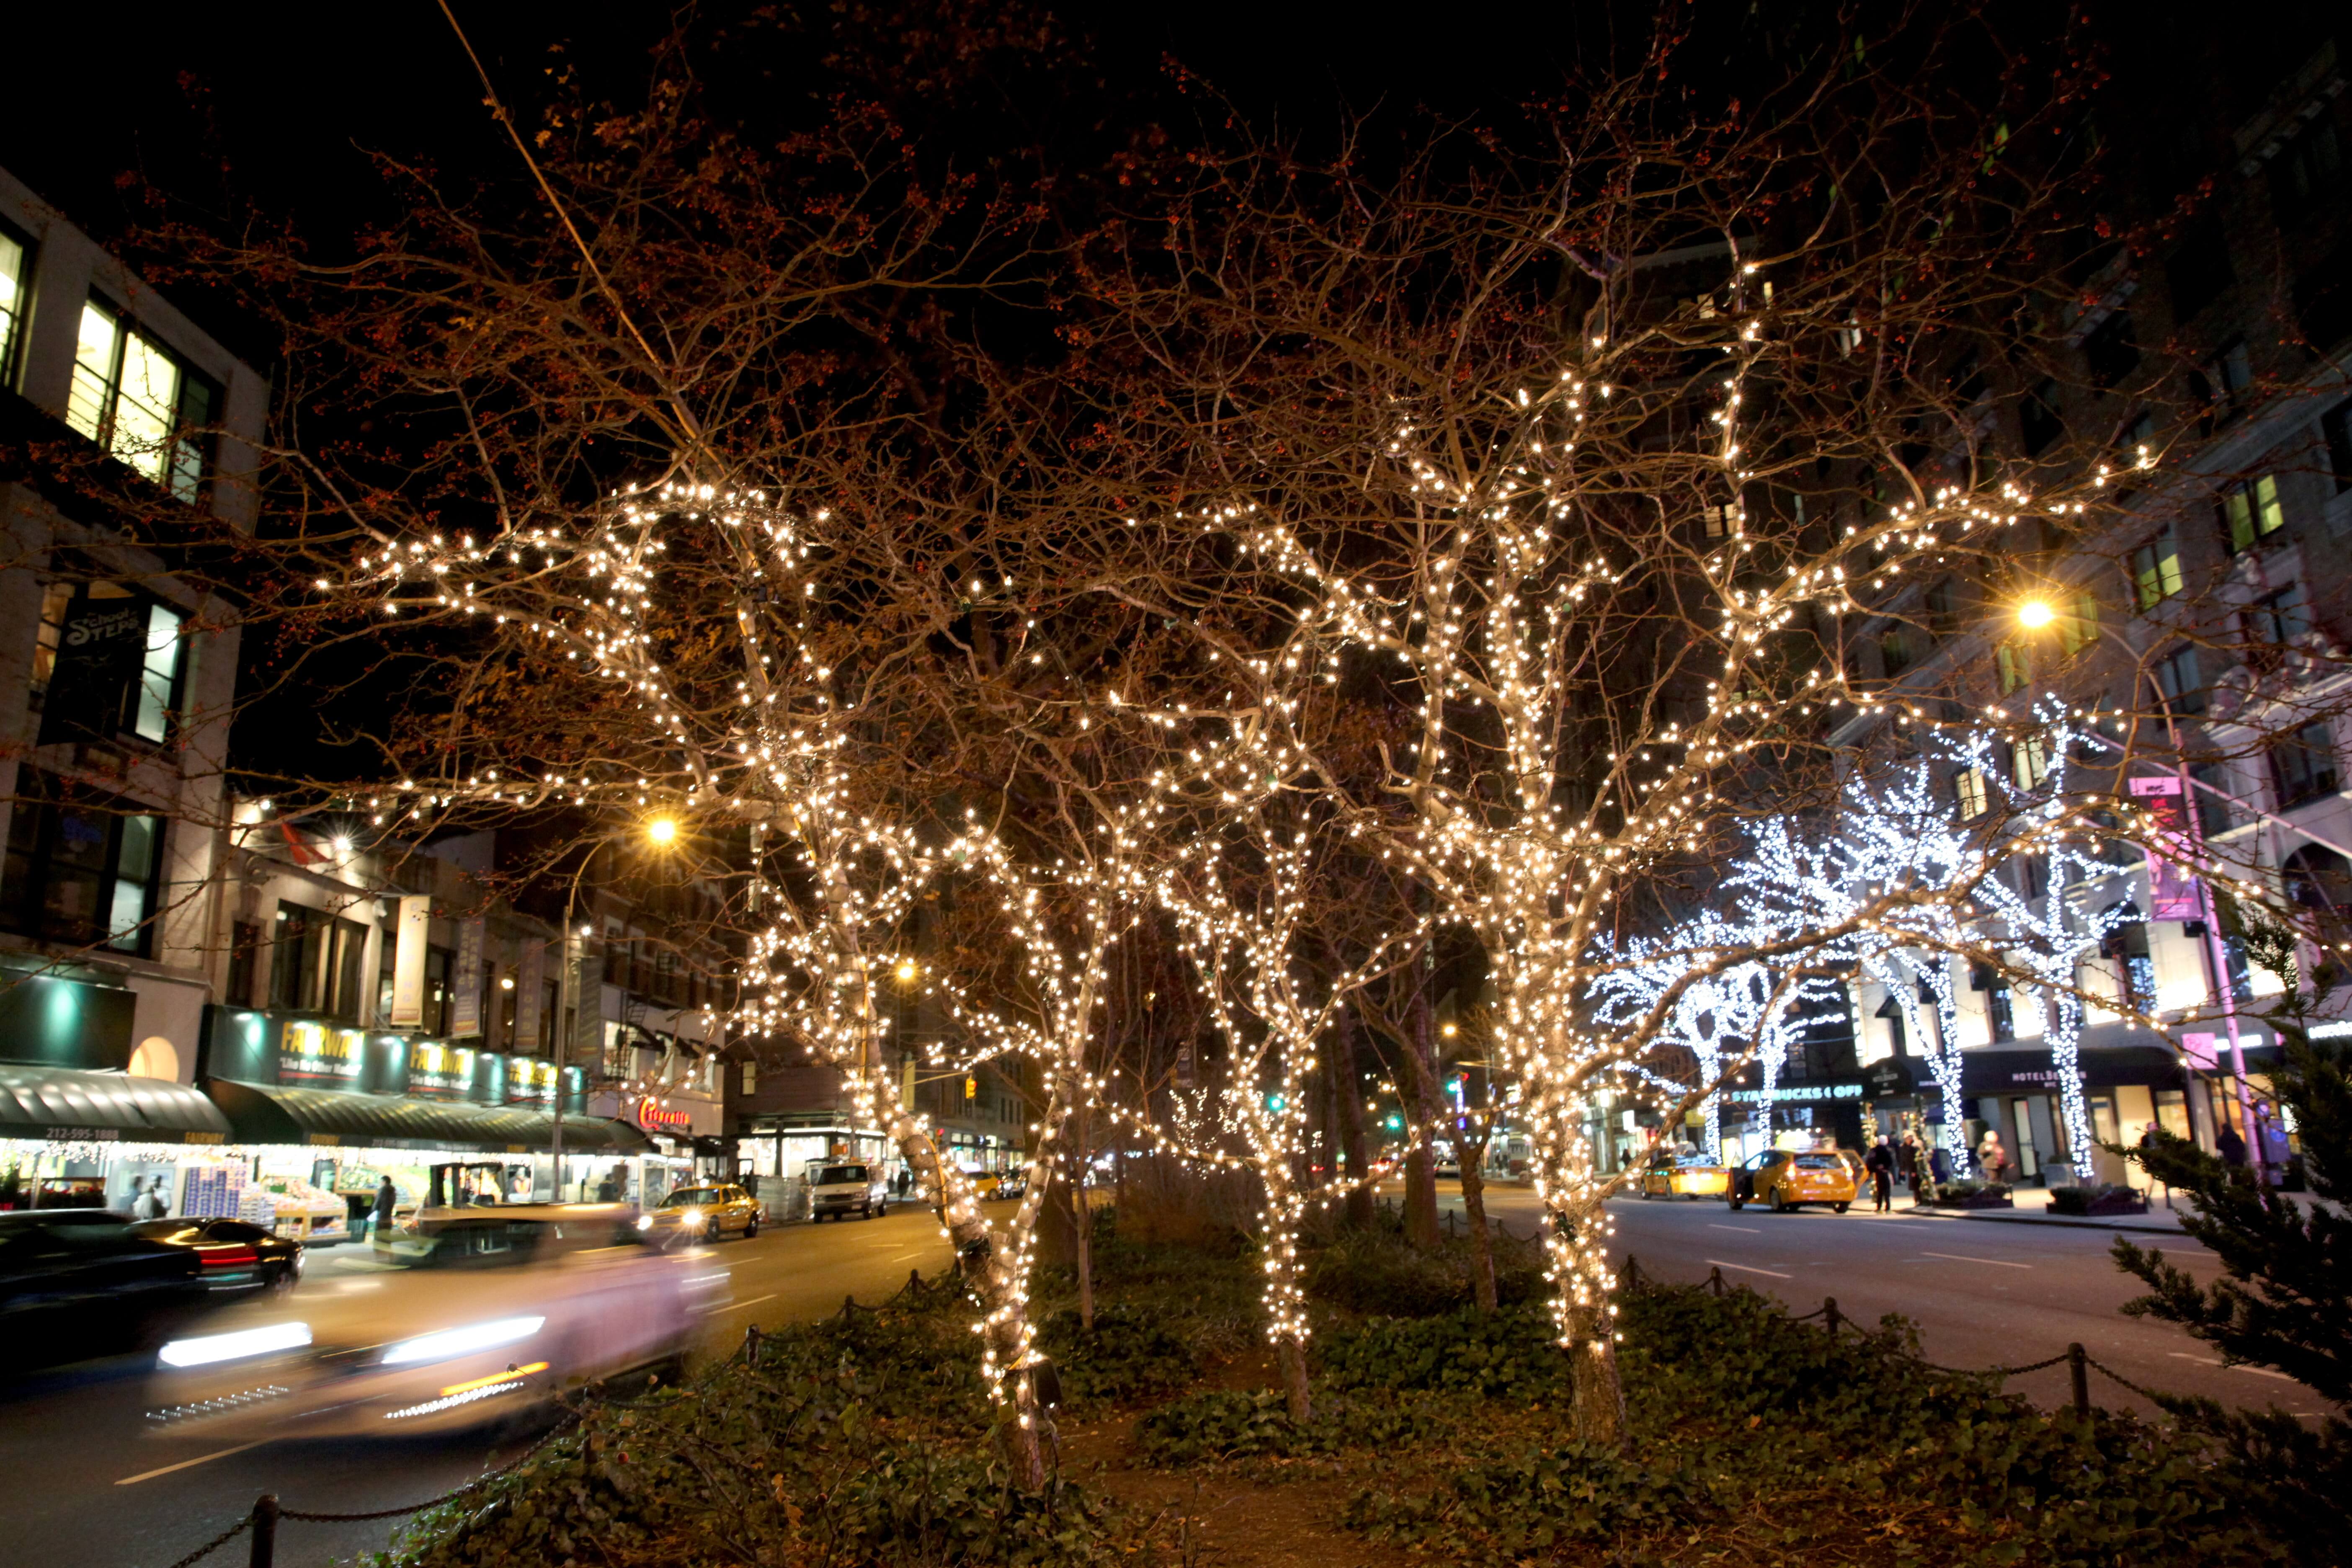 The 2019 Winter Lighting Ceremony by the Broadway Mall Association